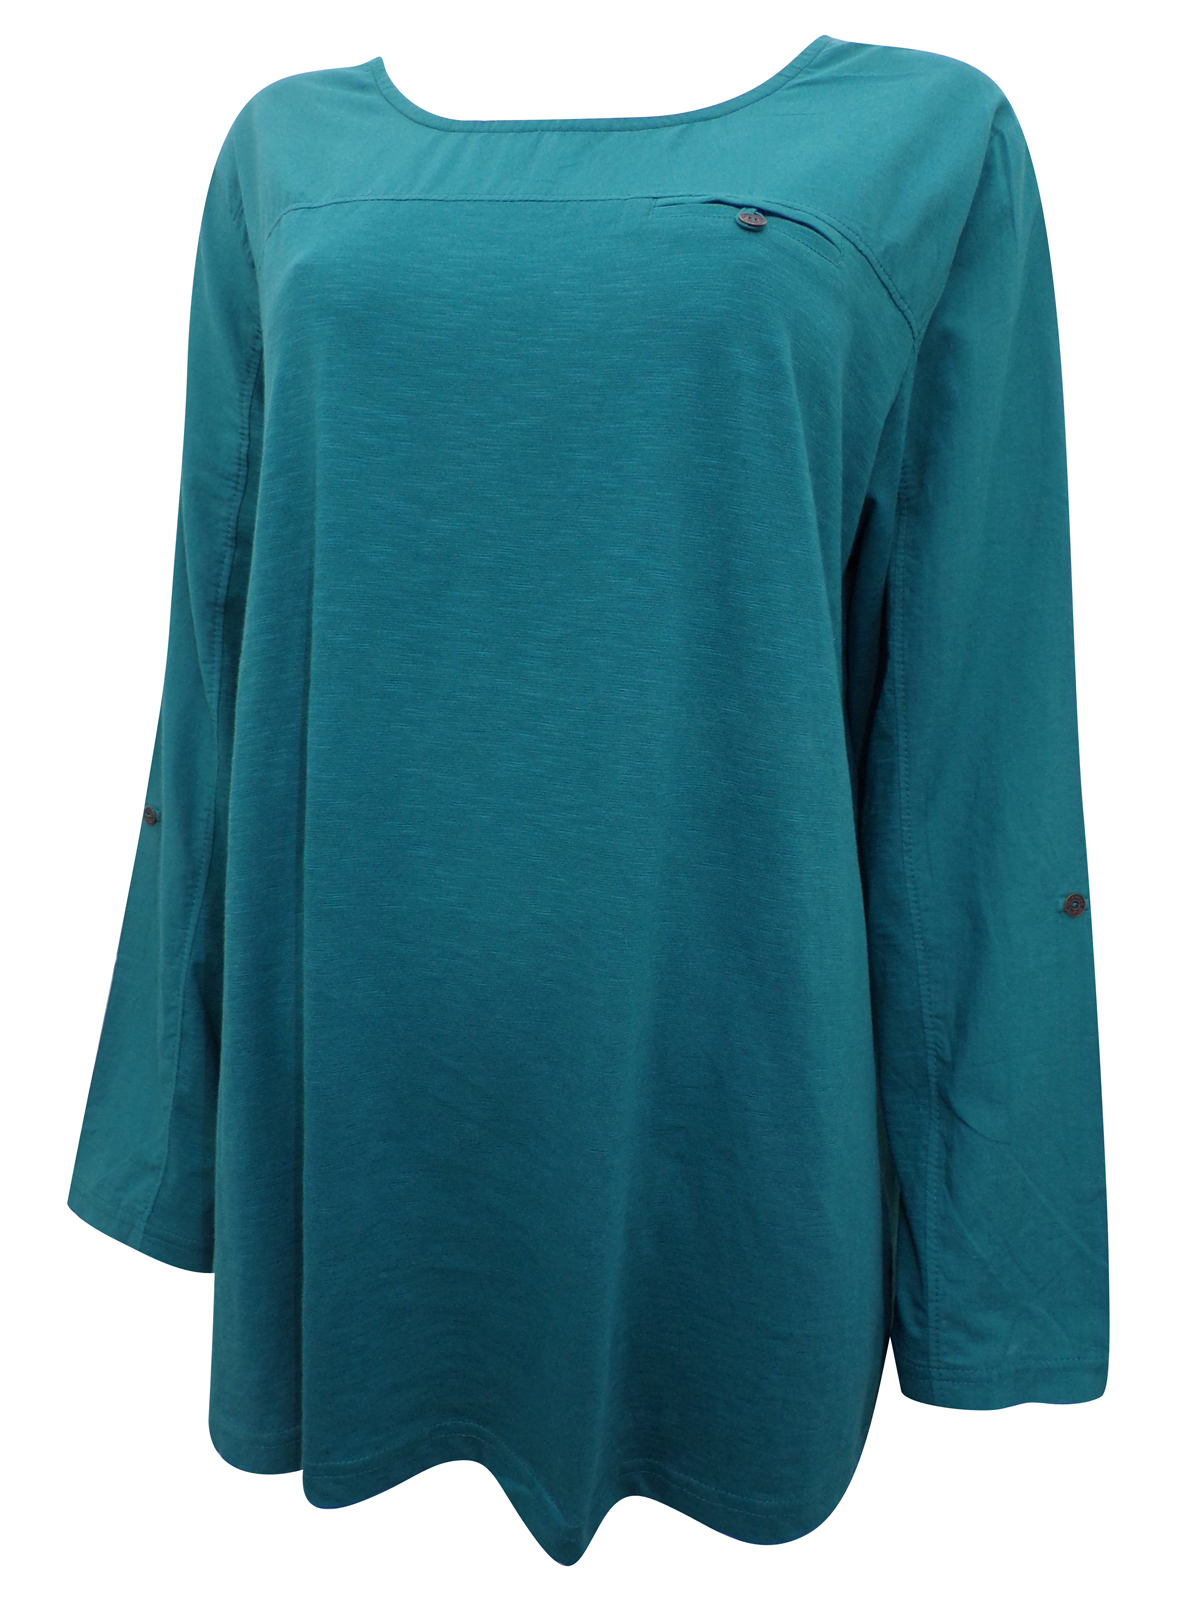 S.Oliver - Triangle - - Triangle TEAL Pure Cotton Panelled Roll Sleeve ...